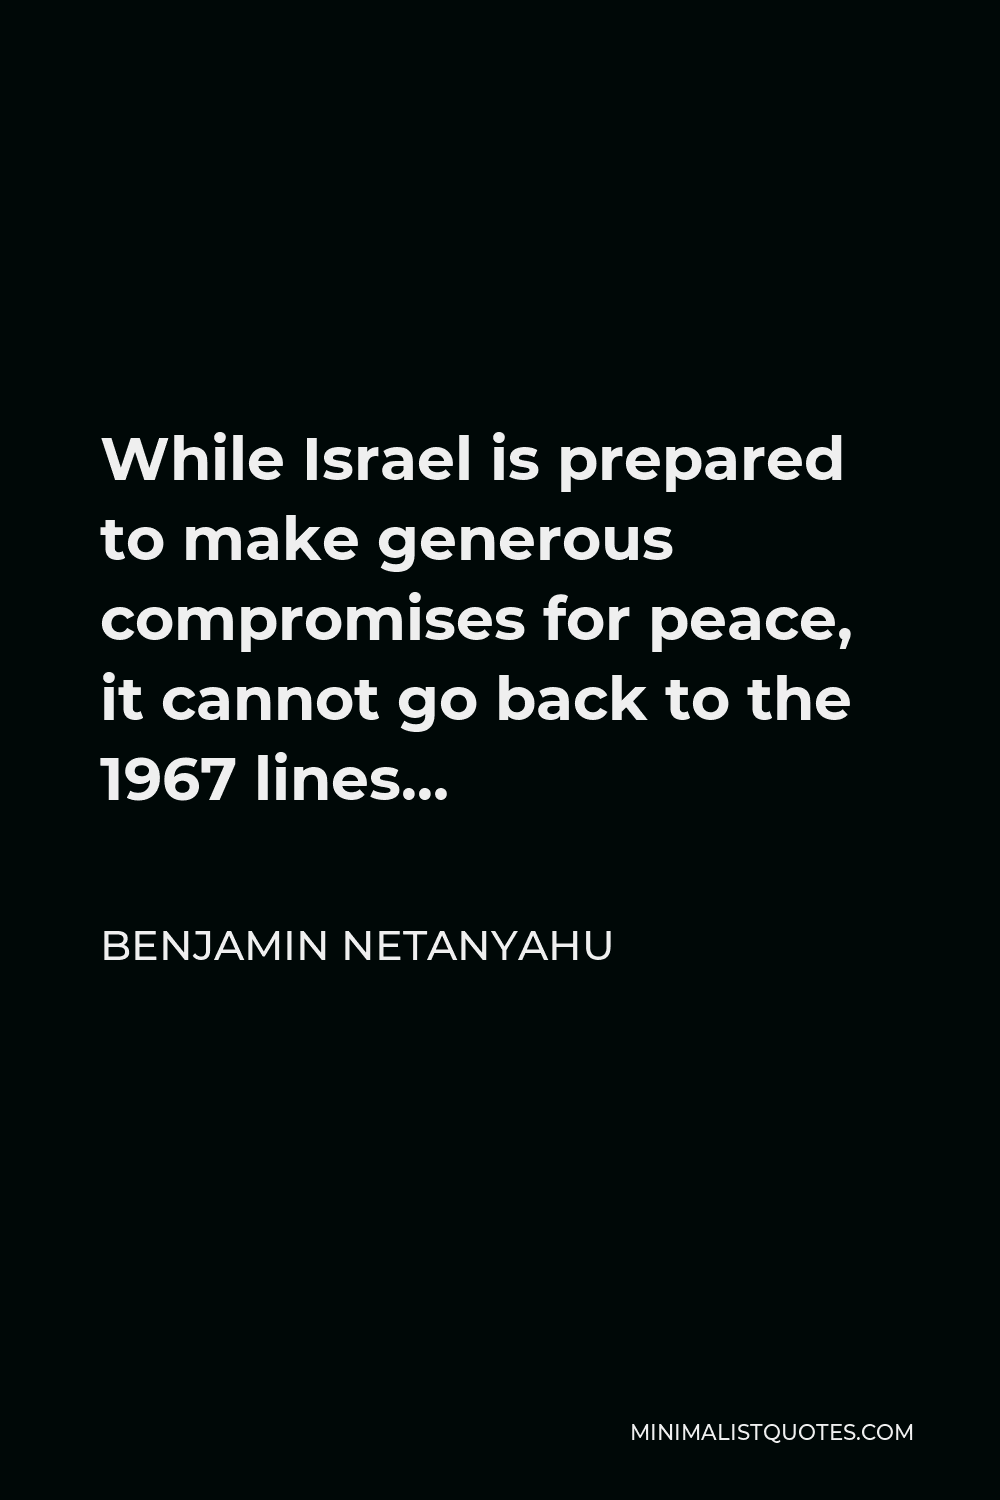 Benjamin Netanyahu Quote - While Israel is prepared to make generous compromises for peace, it cannot go back to the 1967 lines…